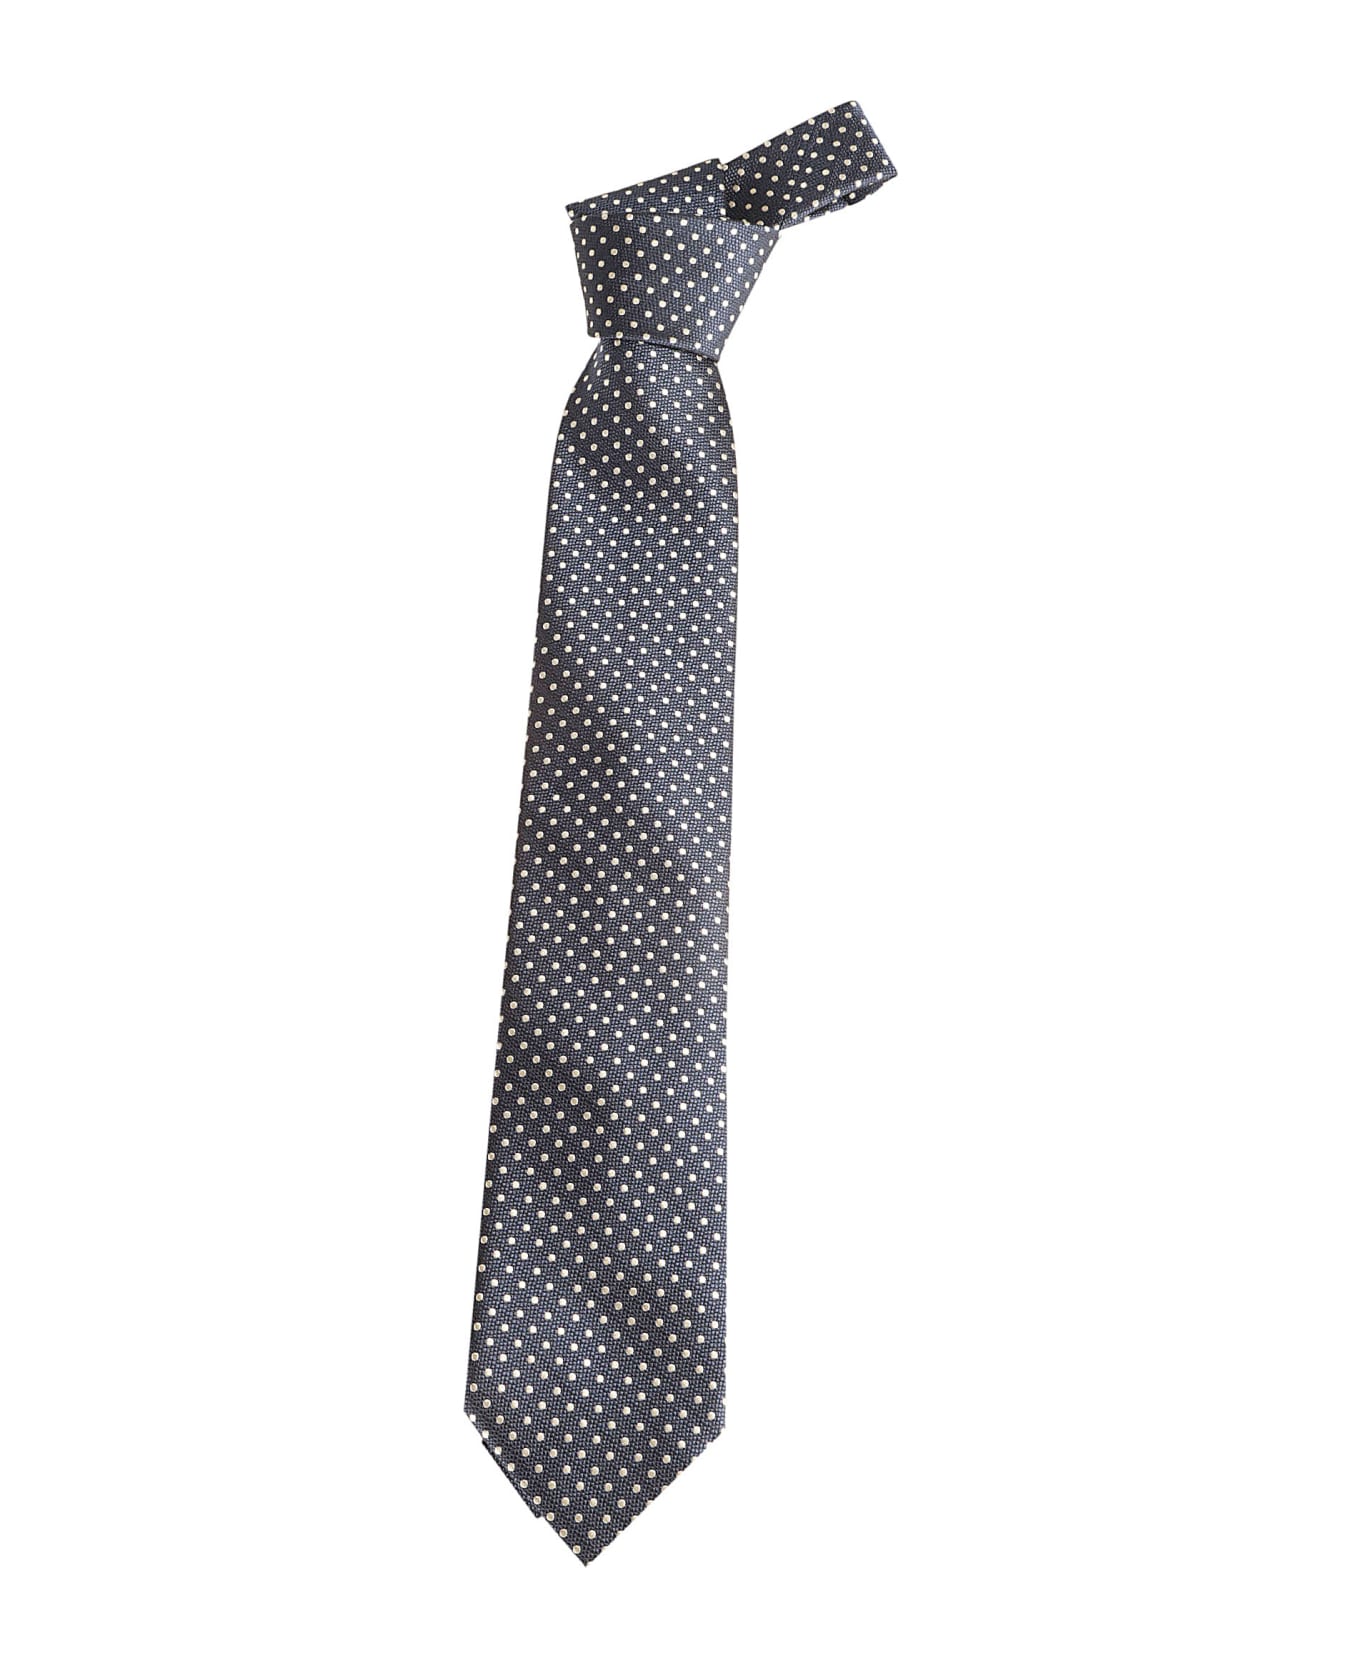 Tom Ford Dotted Print Neck Tie - Ink Blue ネクタイ